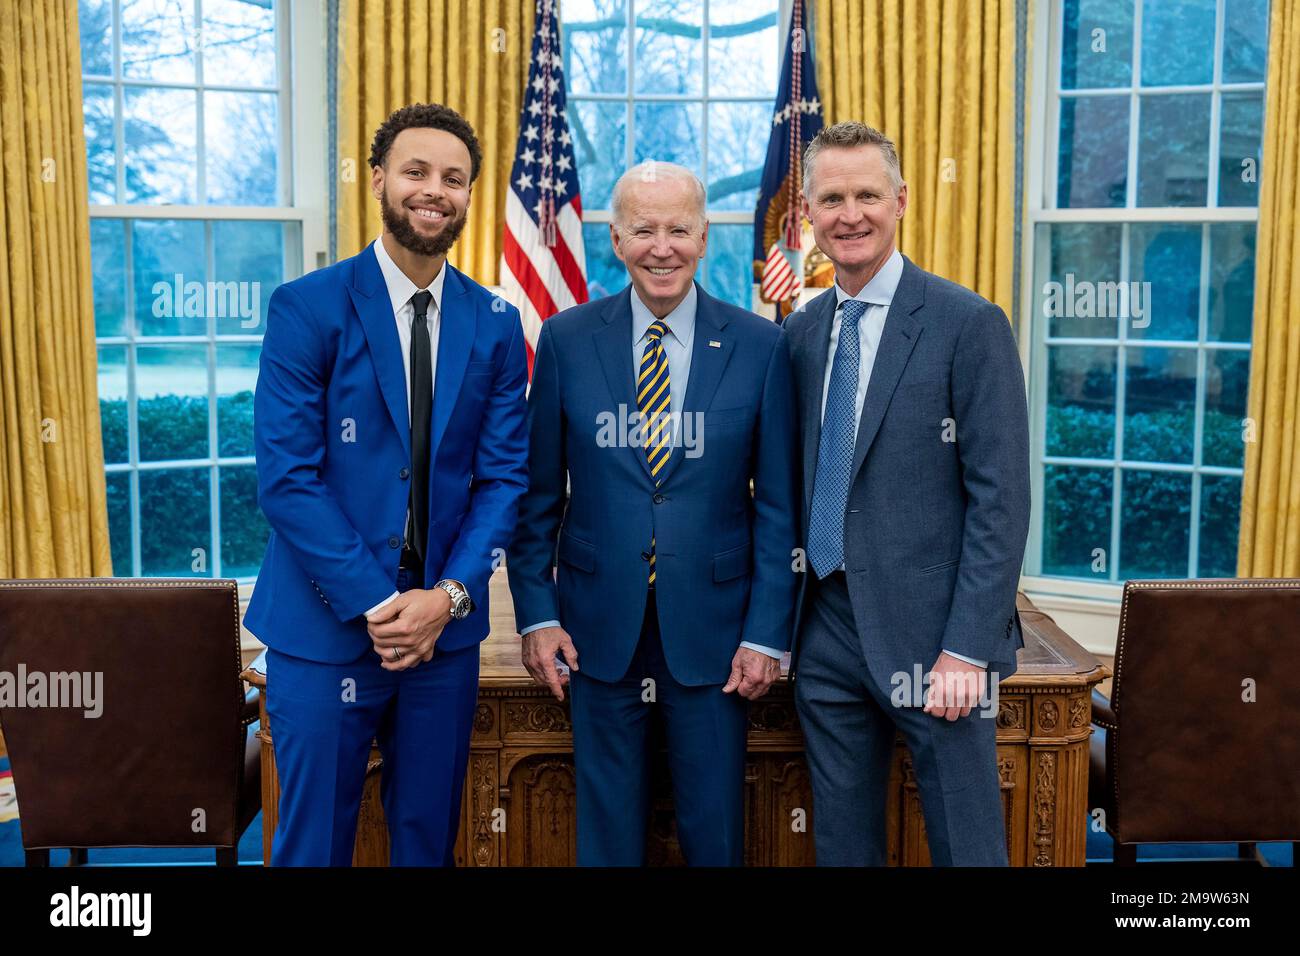 Washington, United States Of America. 17th Jan, 2023. Washington, United States of America. 17 January, 2023. U.S President Joe Biden poses with Golden State Warriors guard Steph Curry, left, and head coach Steve Kerr, right, before joining a celebration of the Warriors 2022 NBA Championship victory in the Oval Office of the White House, January 17, 2023 in Washington, DC Credit: Adam Schultz/White House Photo/Alamy Live News Stock Photo